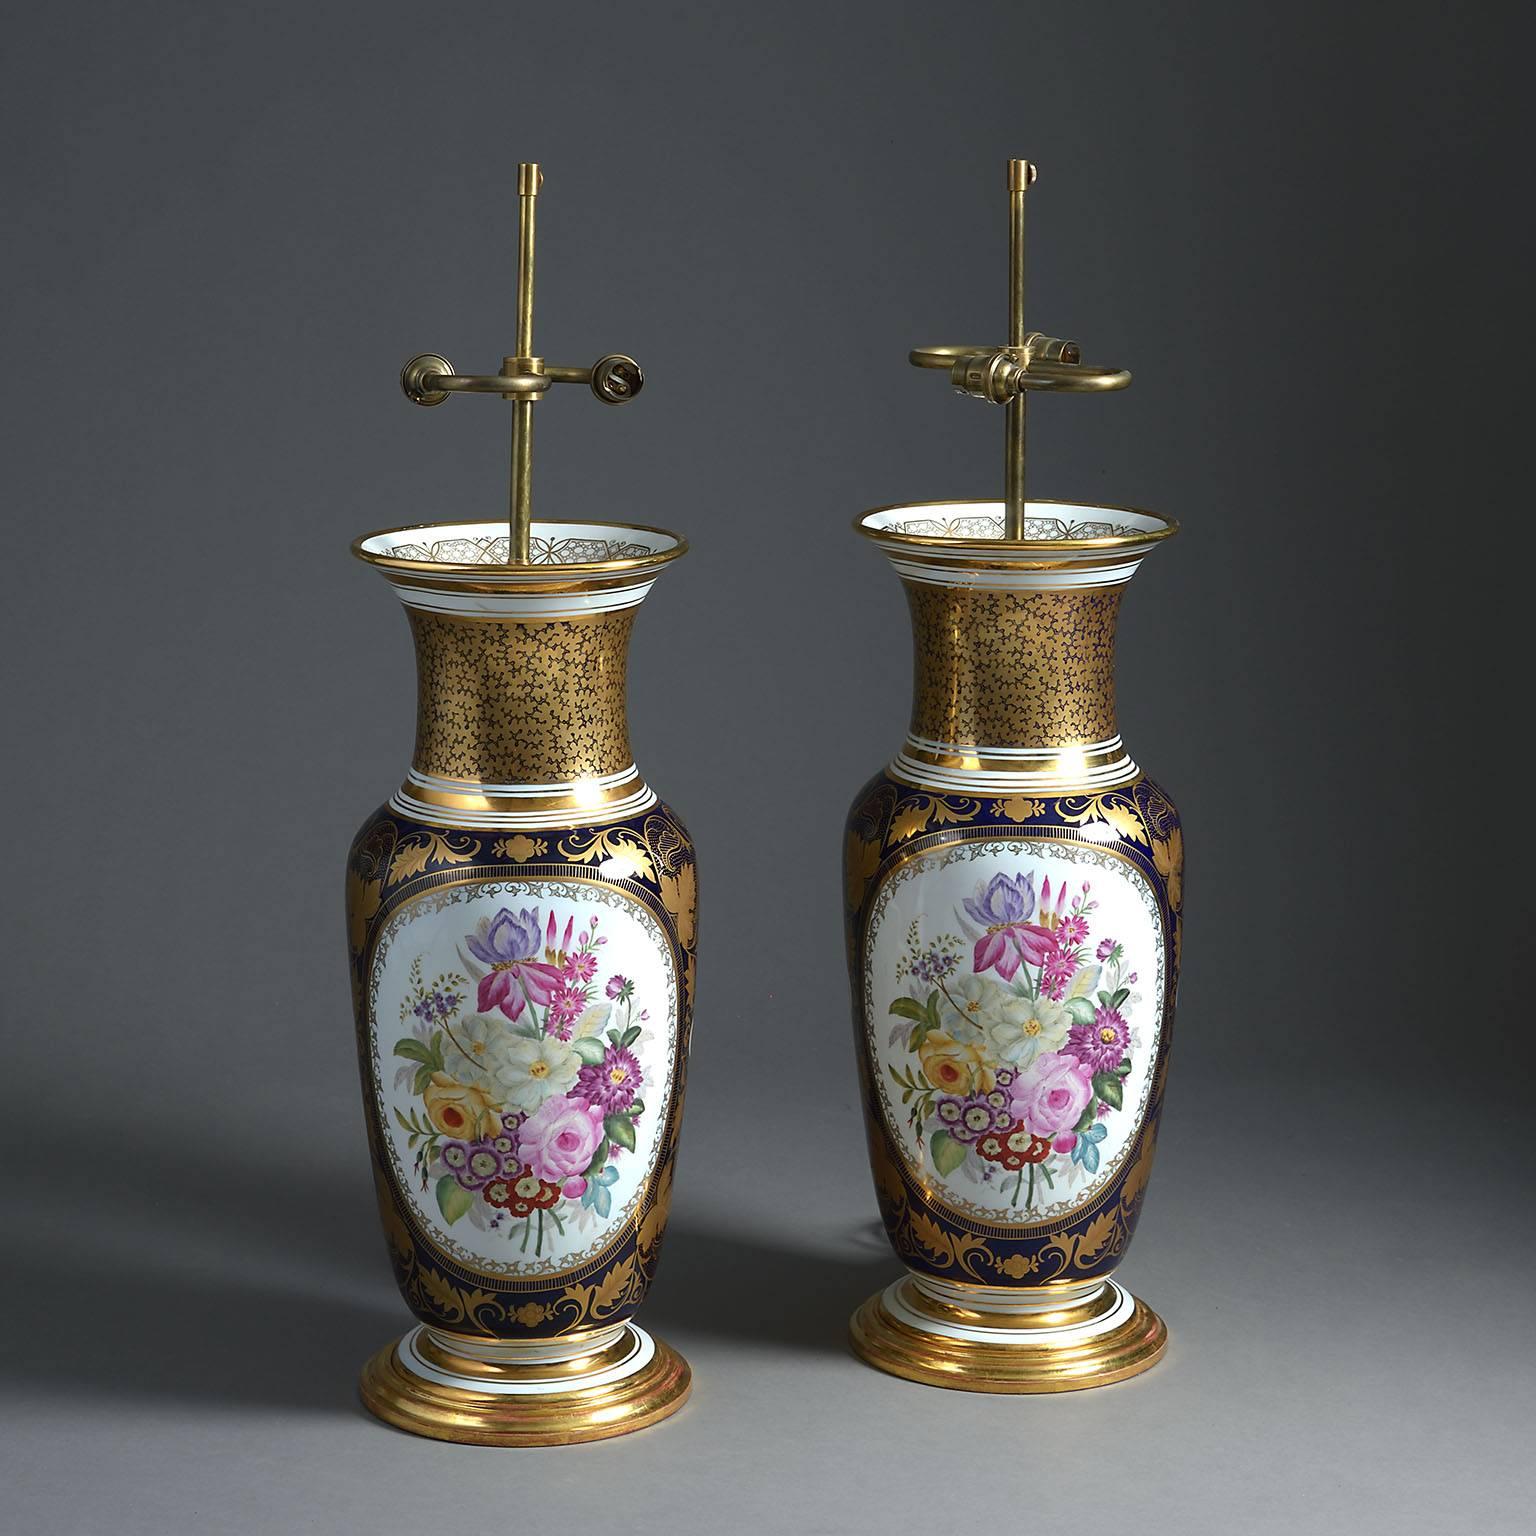 Pair of Large Paris Porcelain Vases with Floral Panels Mounted as Lamps In Good Condition For Sale In London, GB